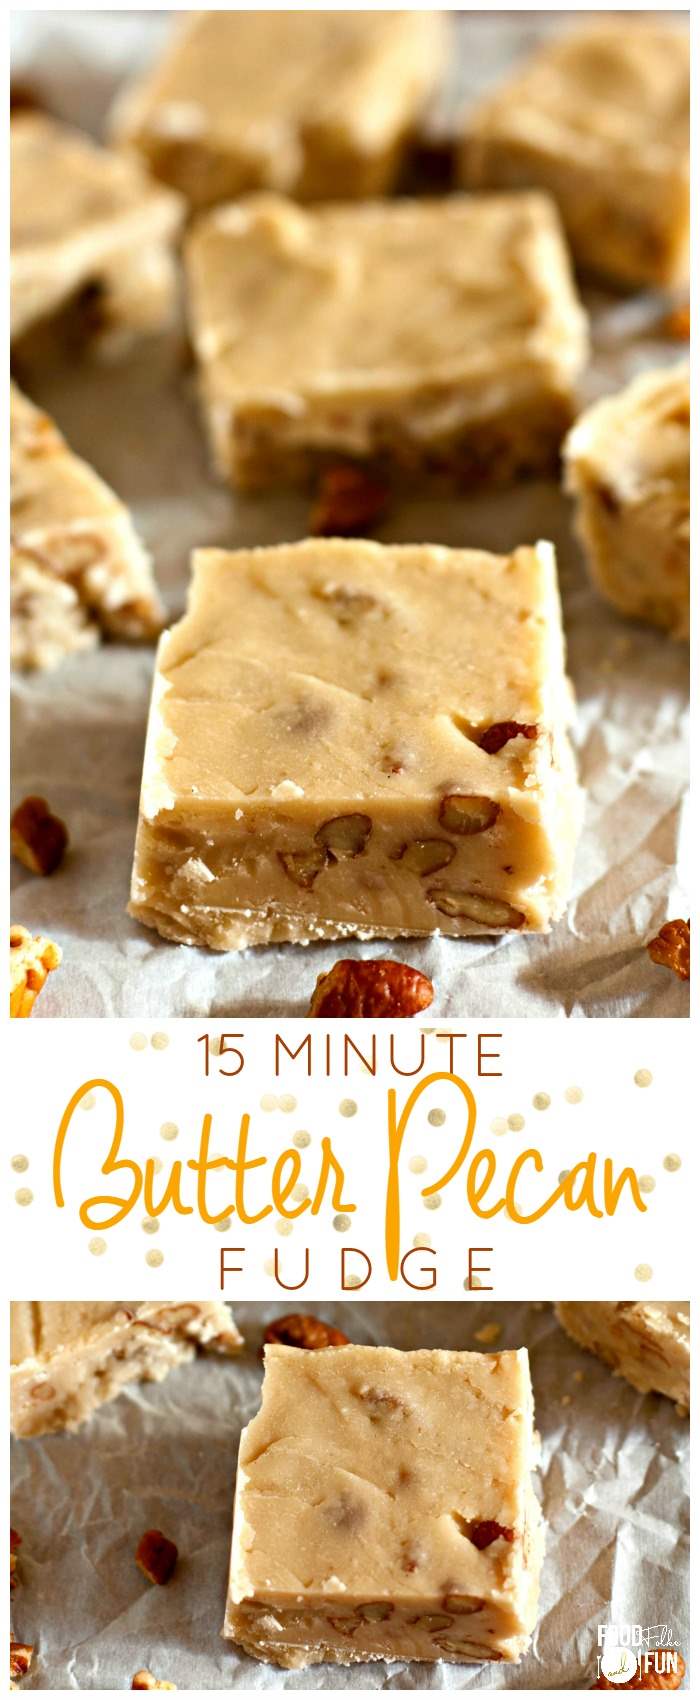 Picture collage of Butter Pecan Fudge. 